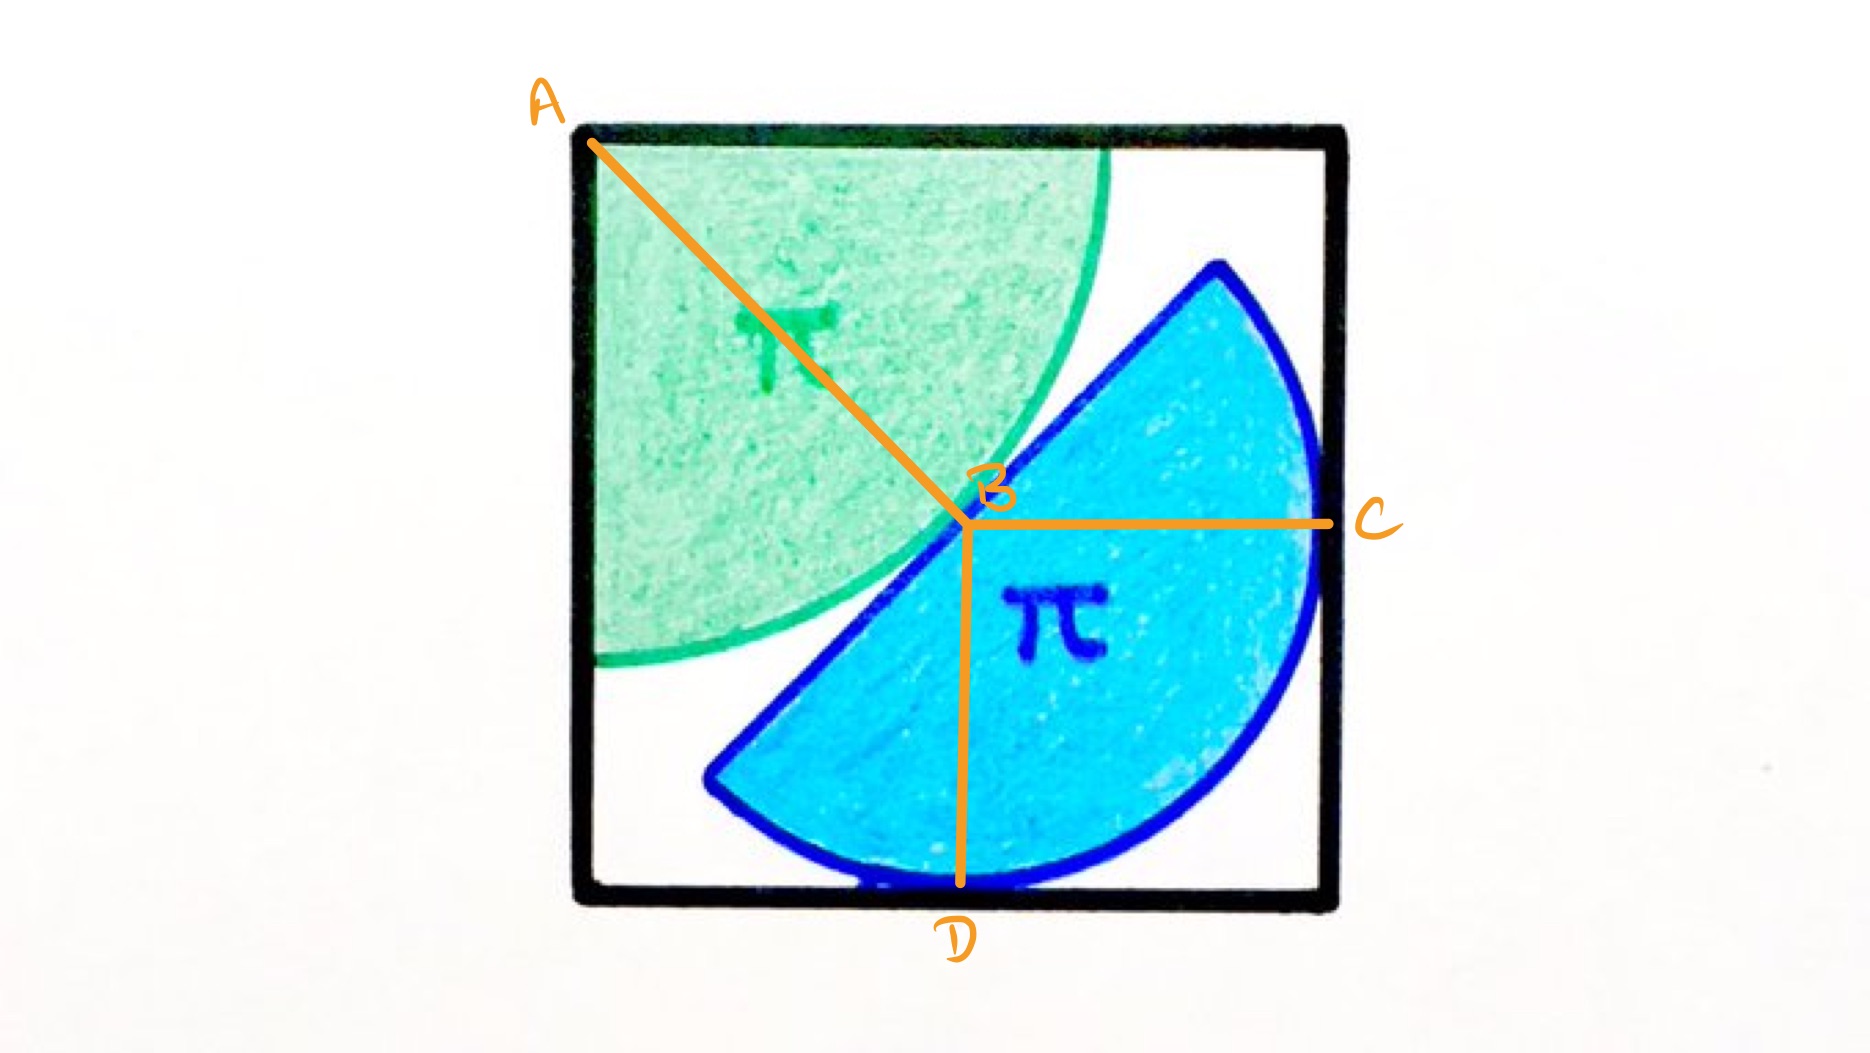 A semi-circle and quarter circle in a square labelled